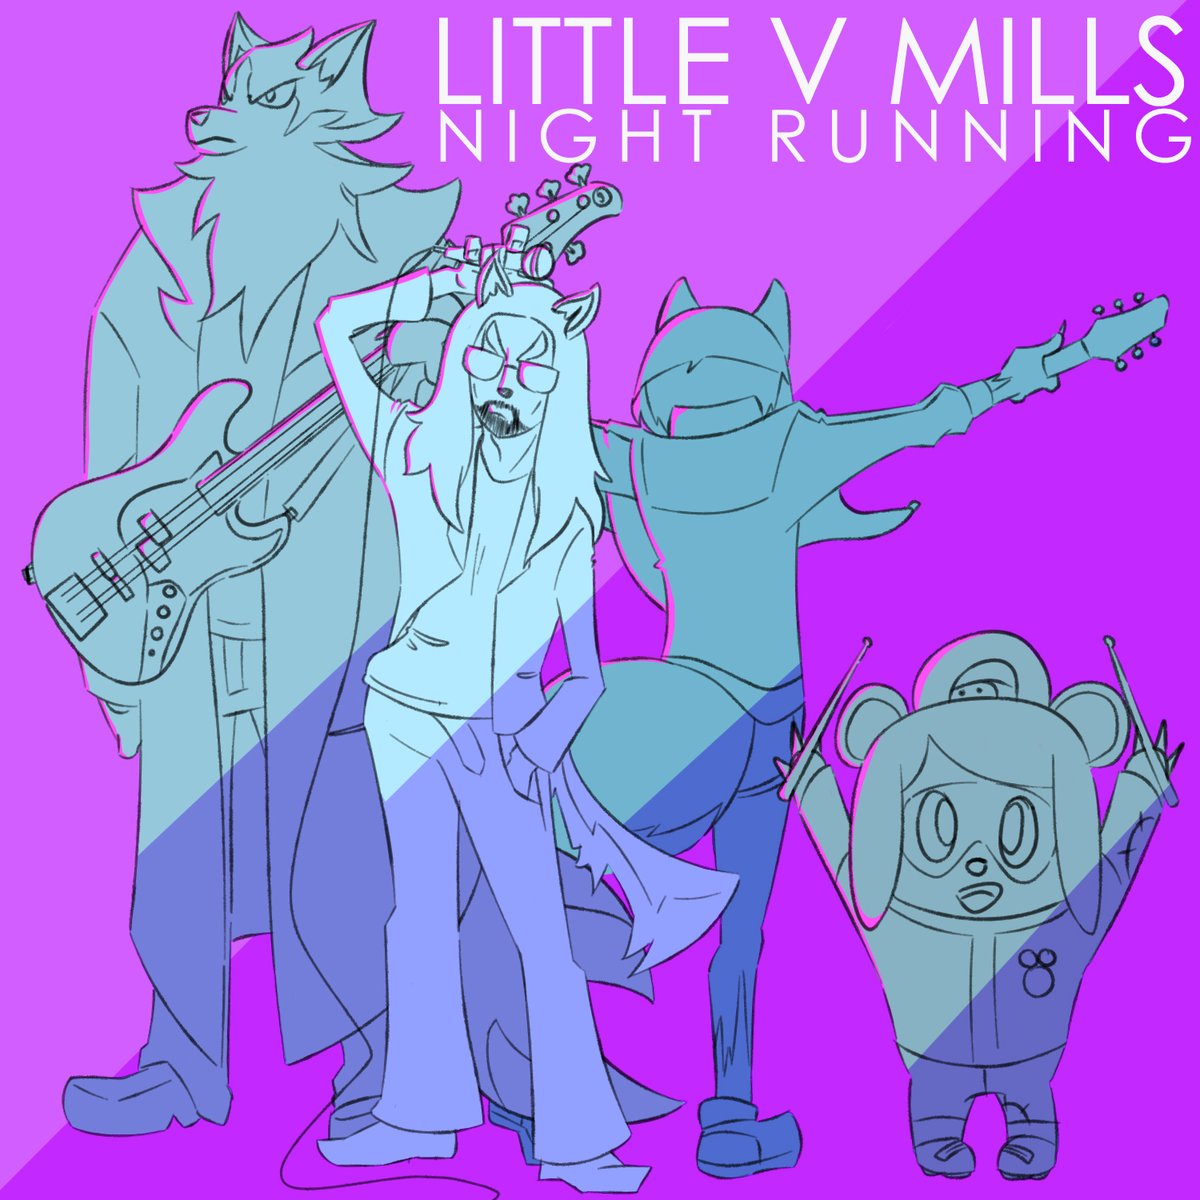  @LittleVMills feat. BNA ☆ GANG // Night Running (Outro Version)Based on his latest cover: 